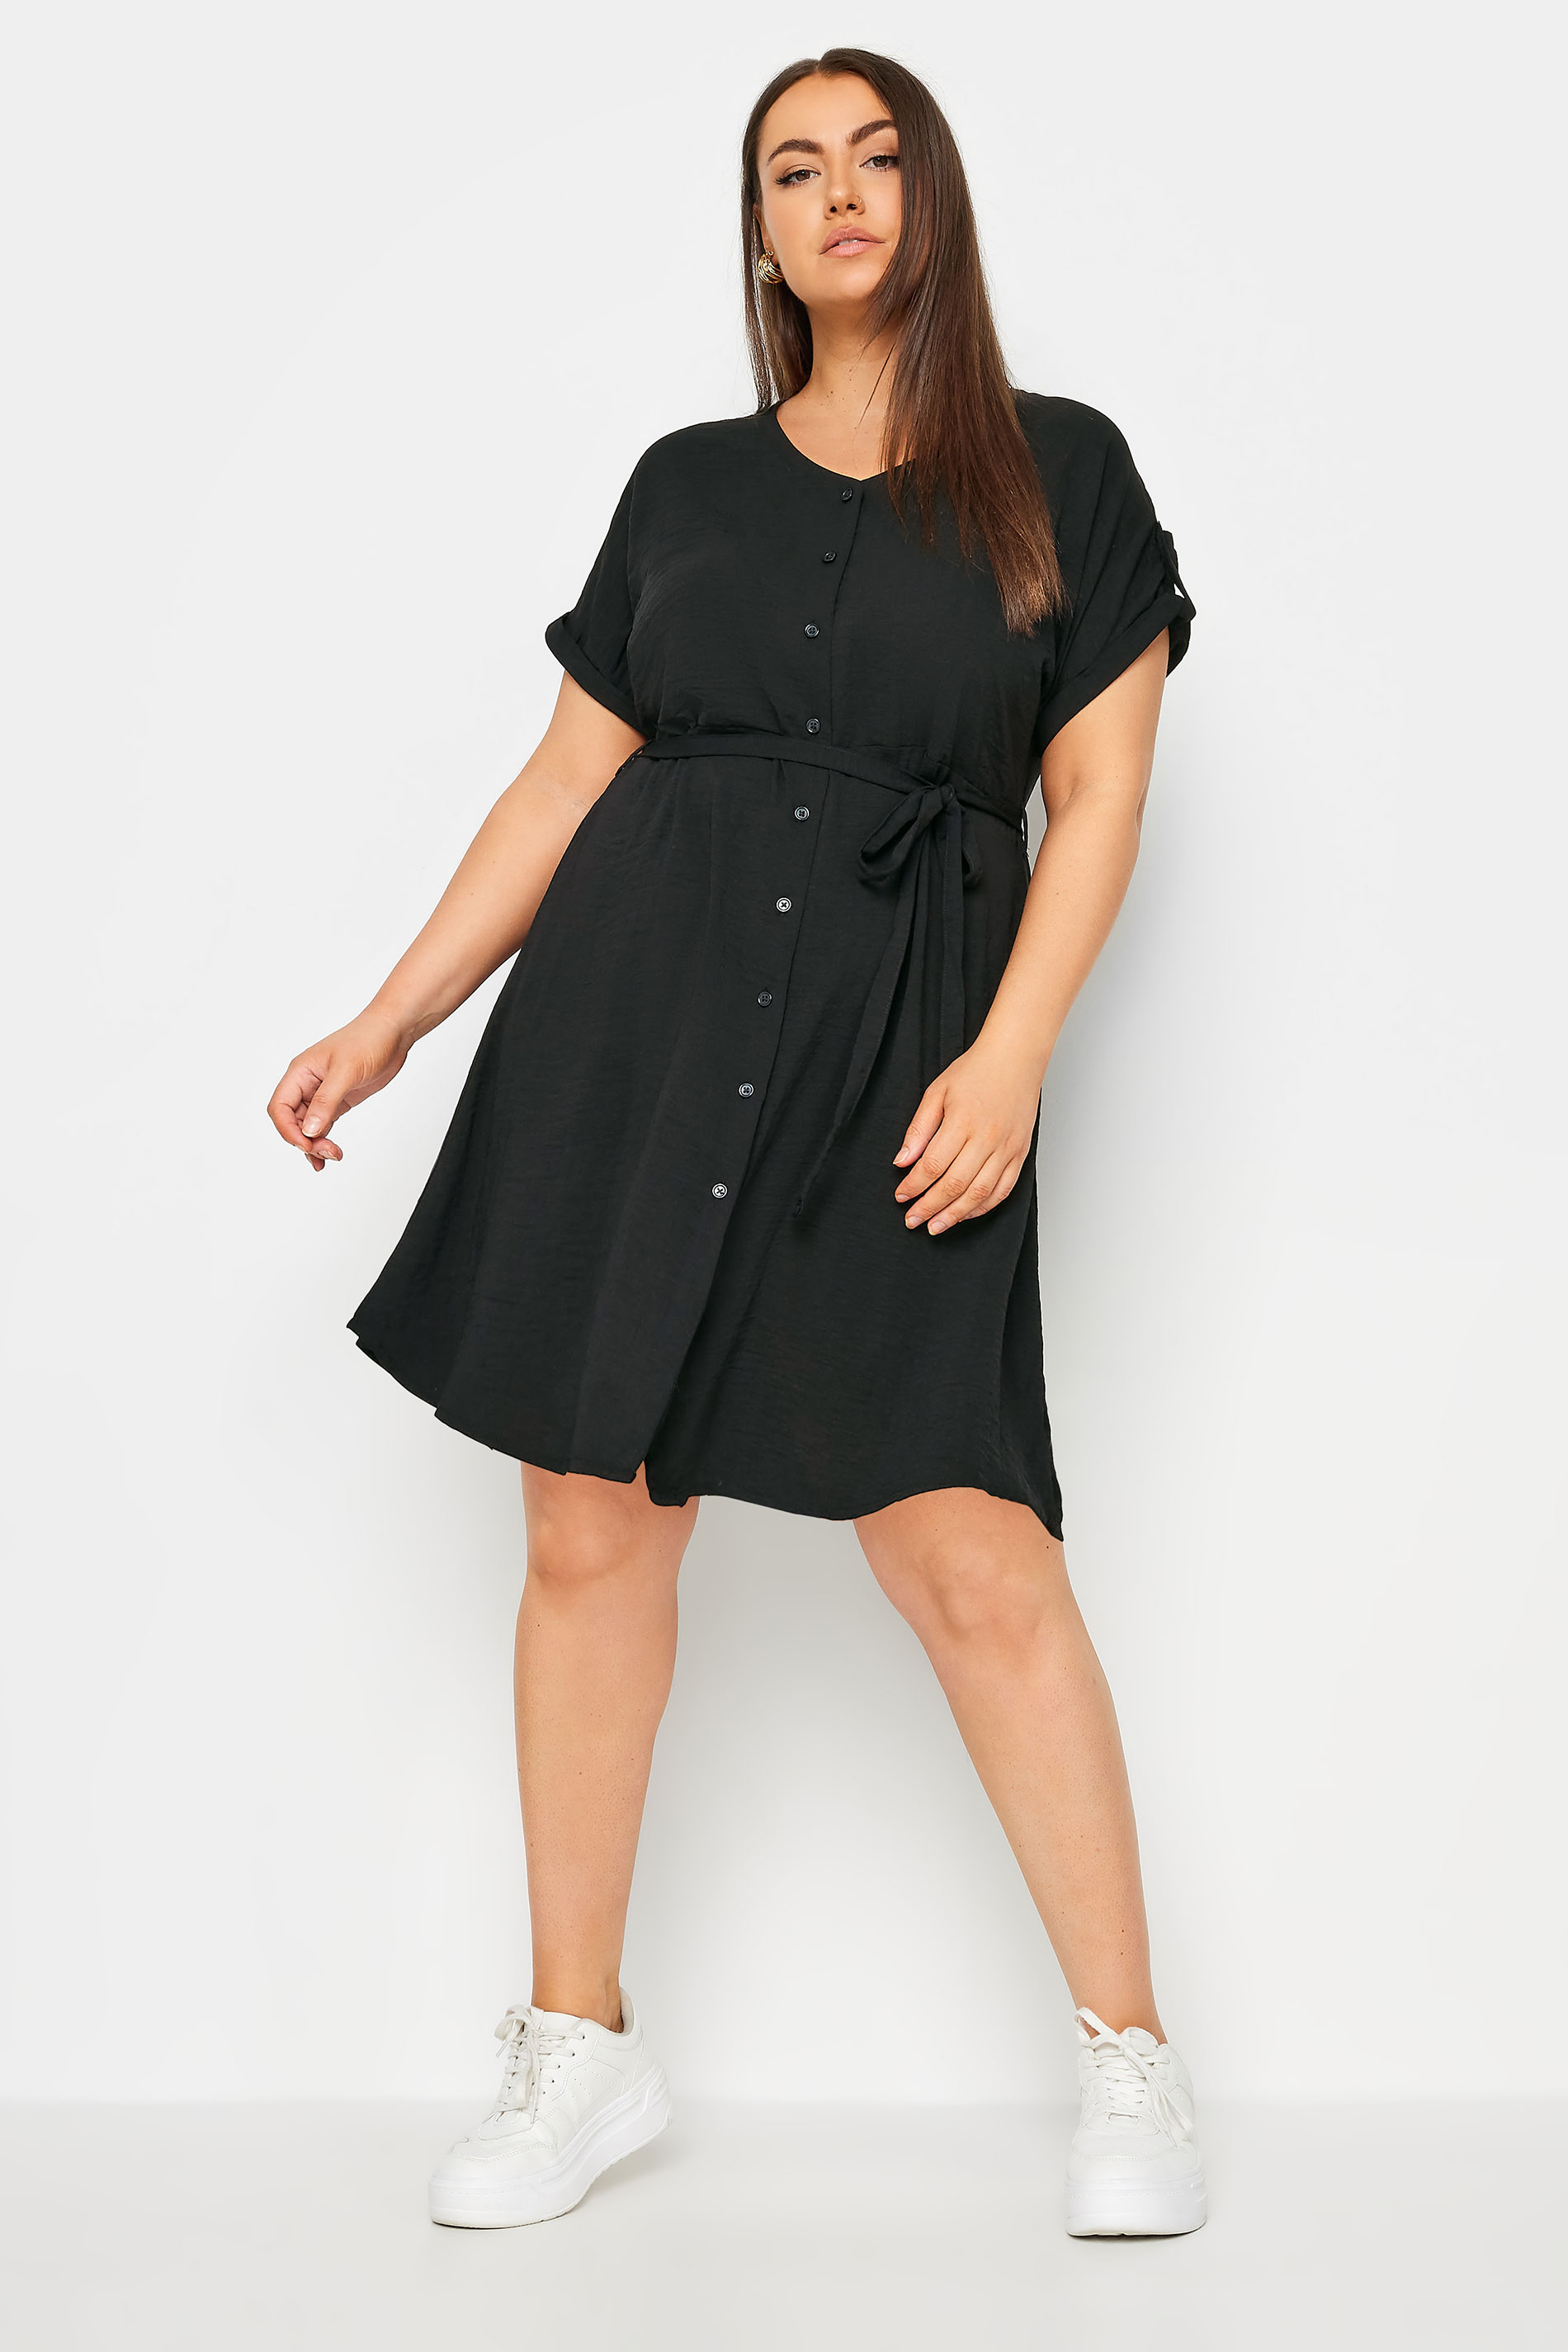 YOURS Curve Plus Size Black Utility Shirt Dress | Yours Clothing  2